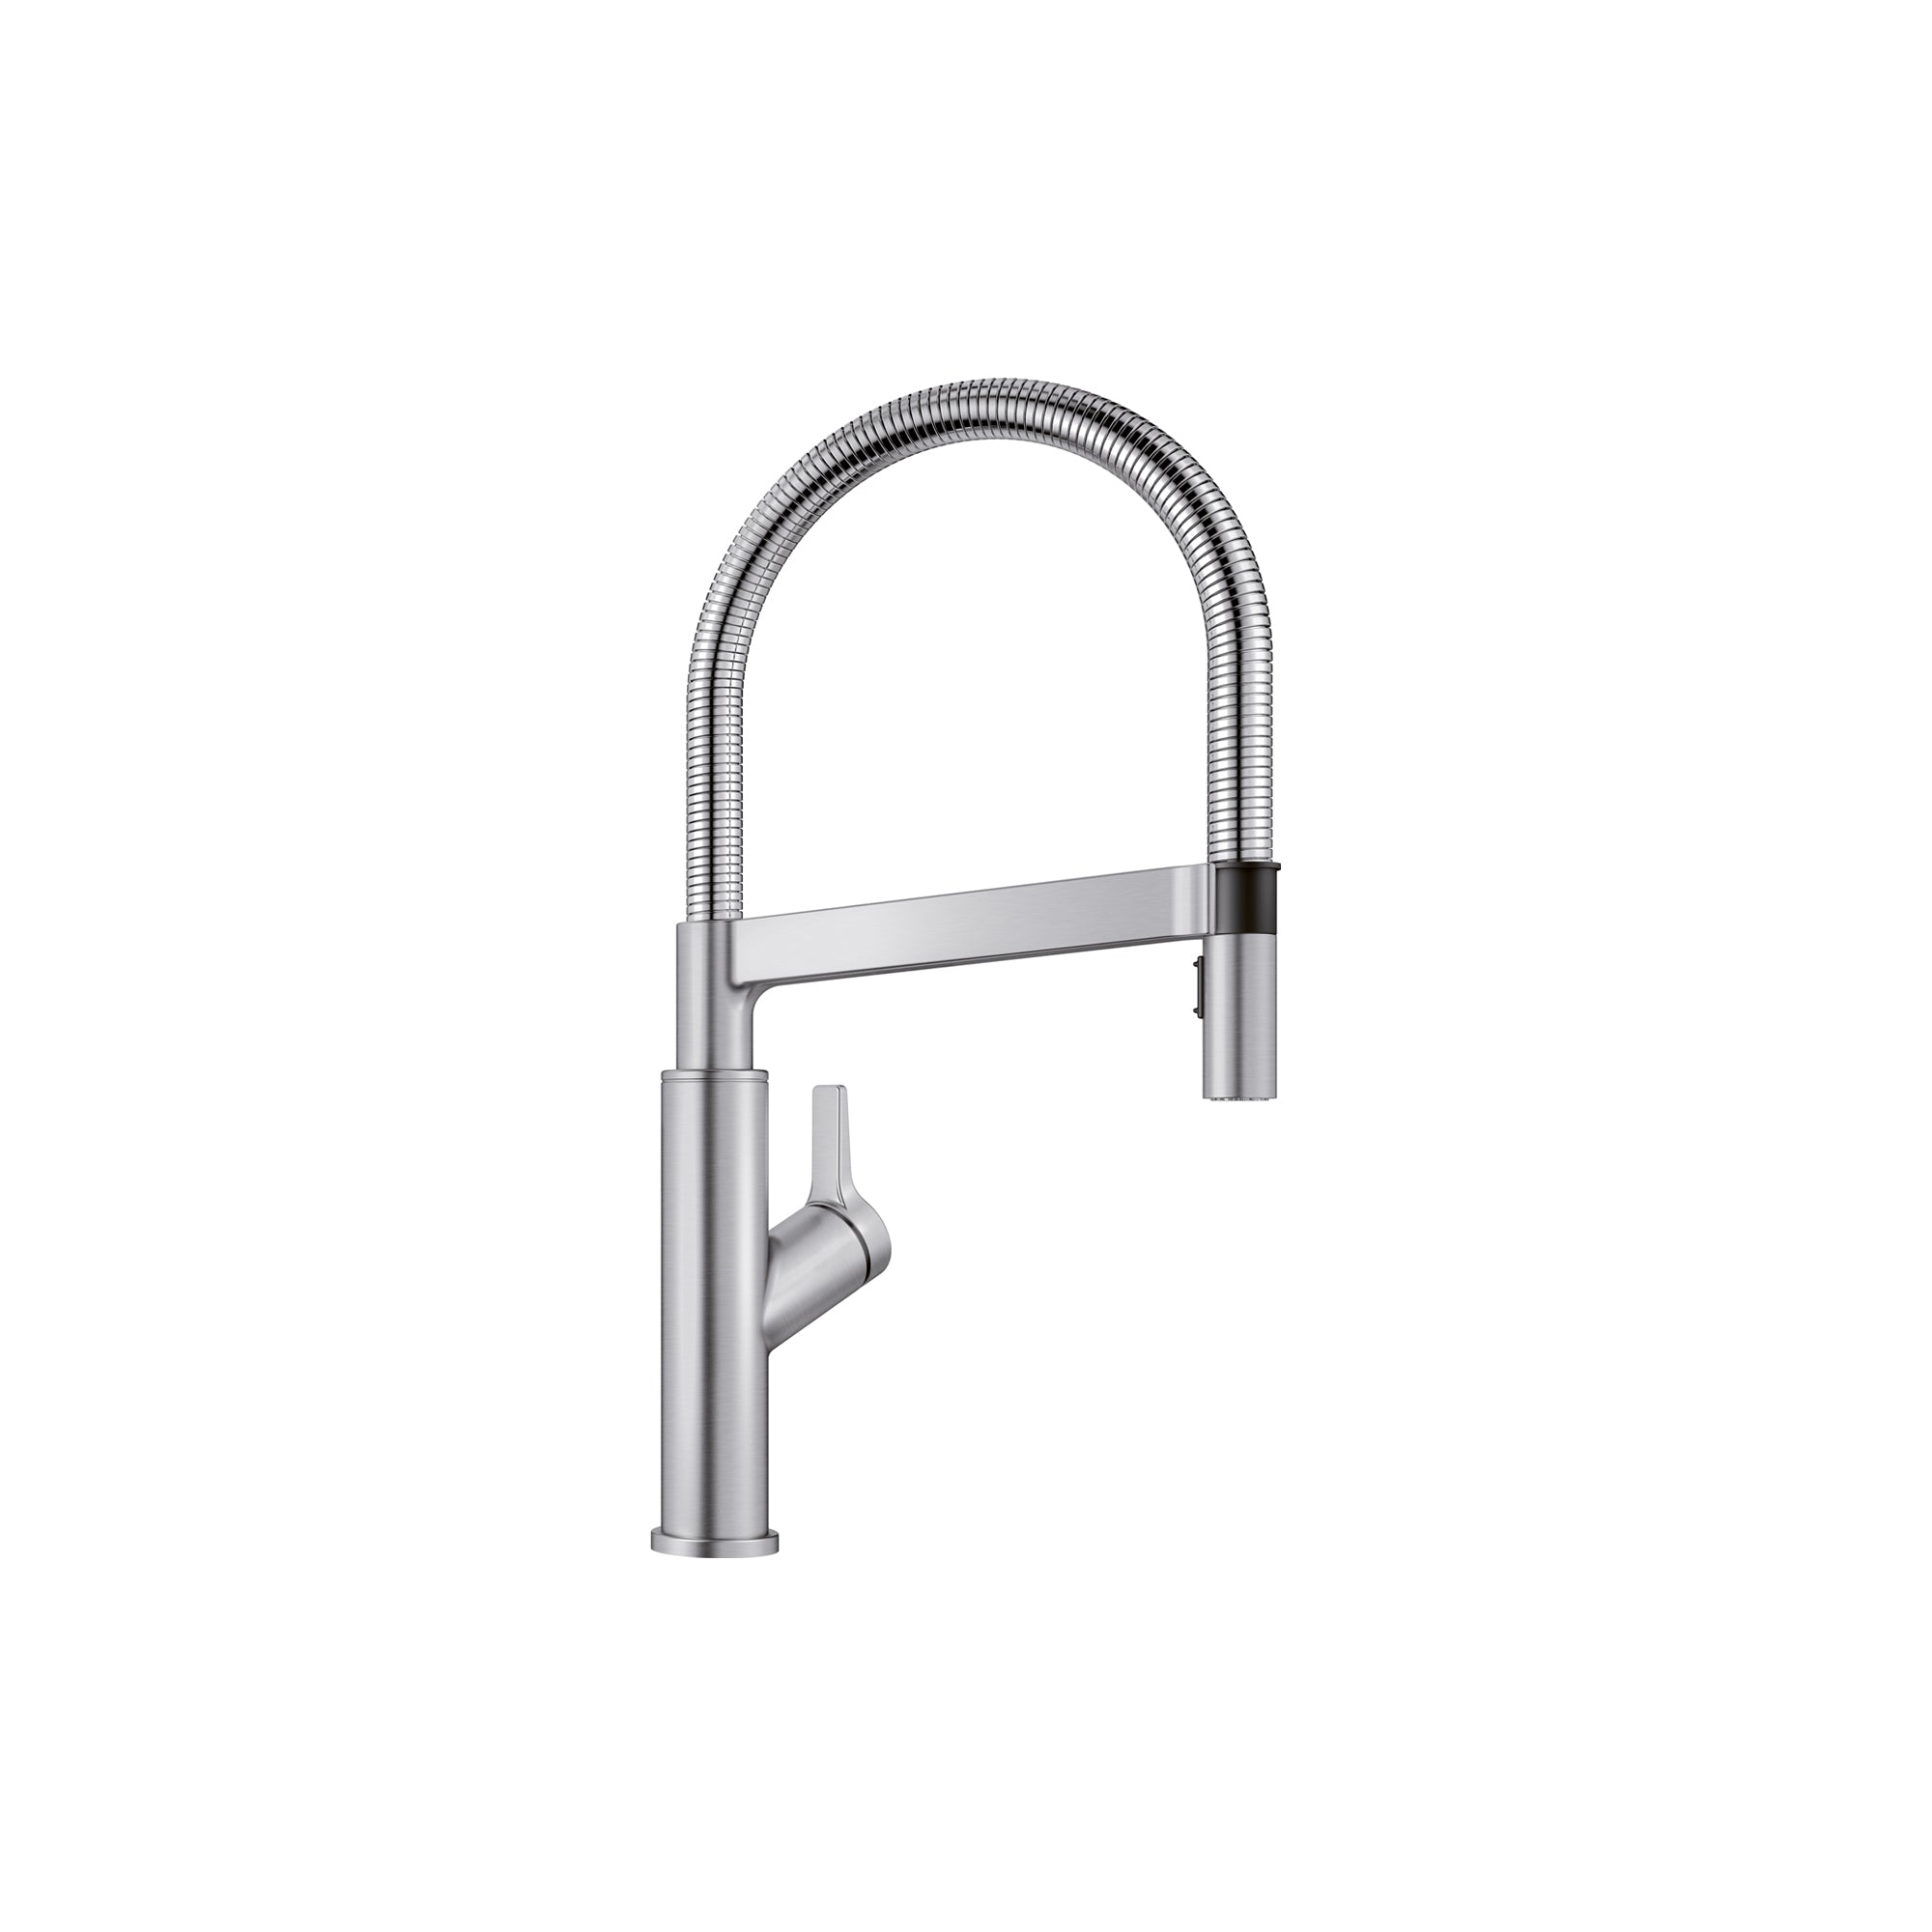 Blanco 401991- SOLENTA Semi-Pro High Arc Kitchen Faucet, Stainless Finish - FaucetExpress.ca